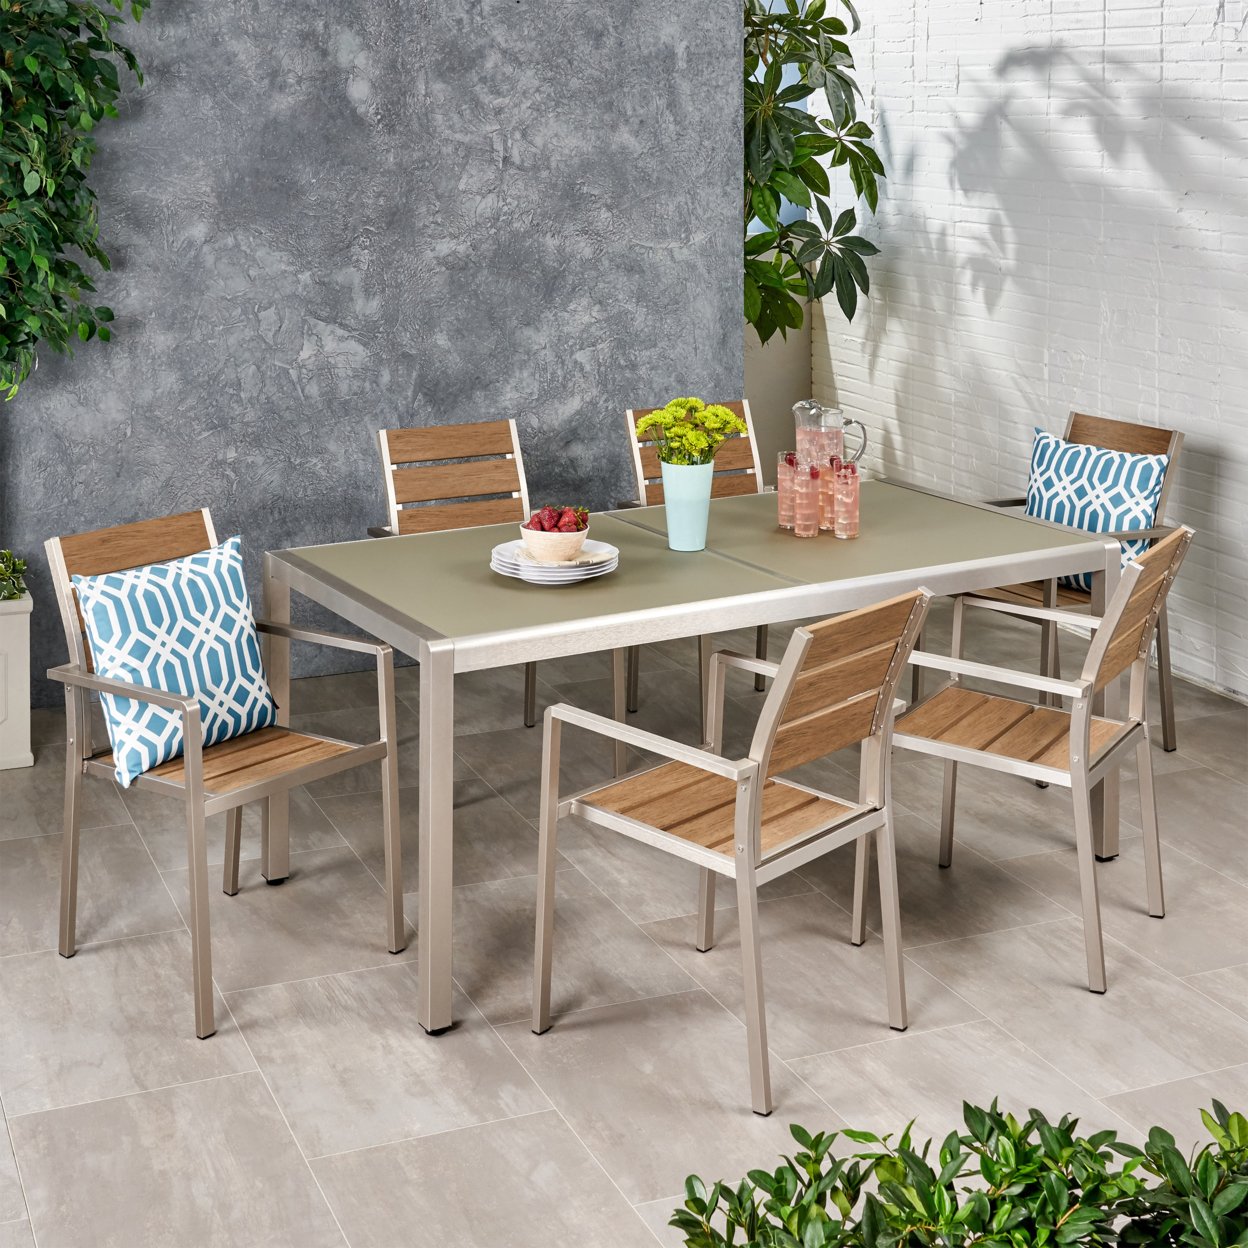 Miranda Outdoor Modern 6 Seater Aluminum Dining Set With Tempered Glass Table Top - Gray + Natural + Silver